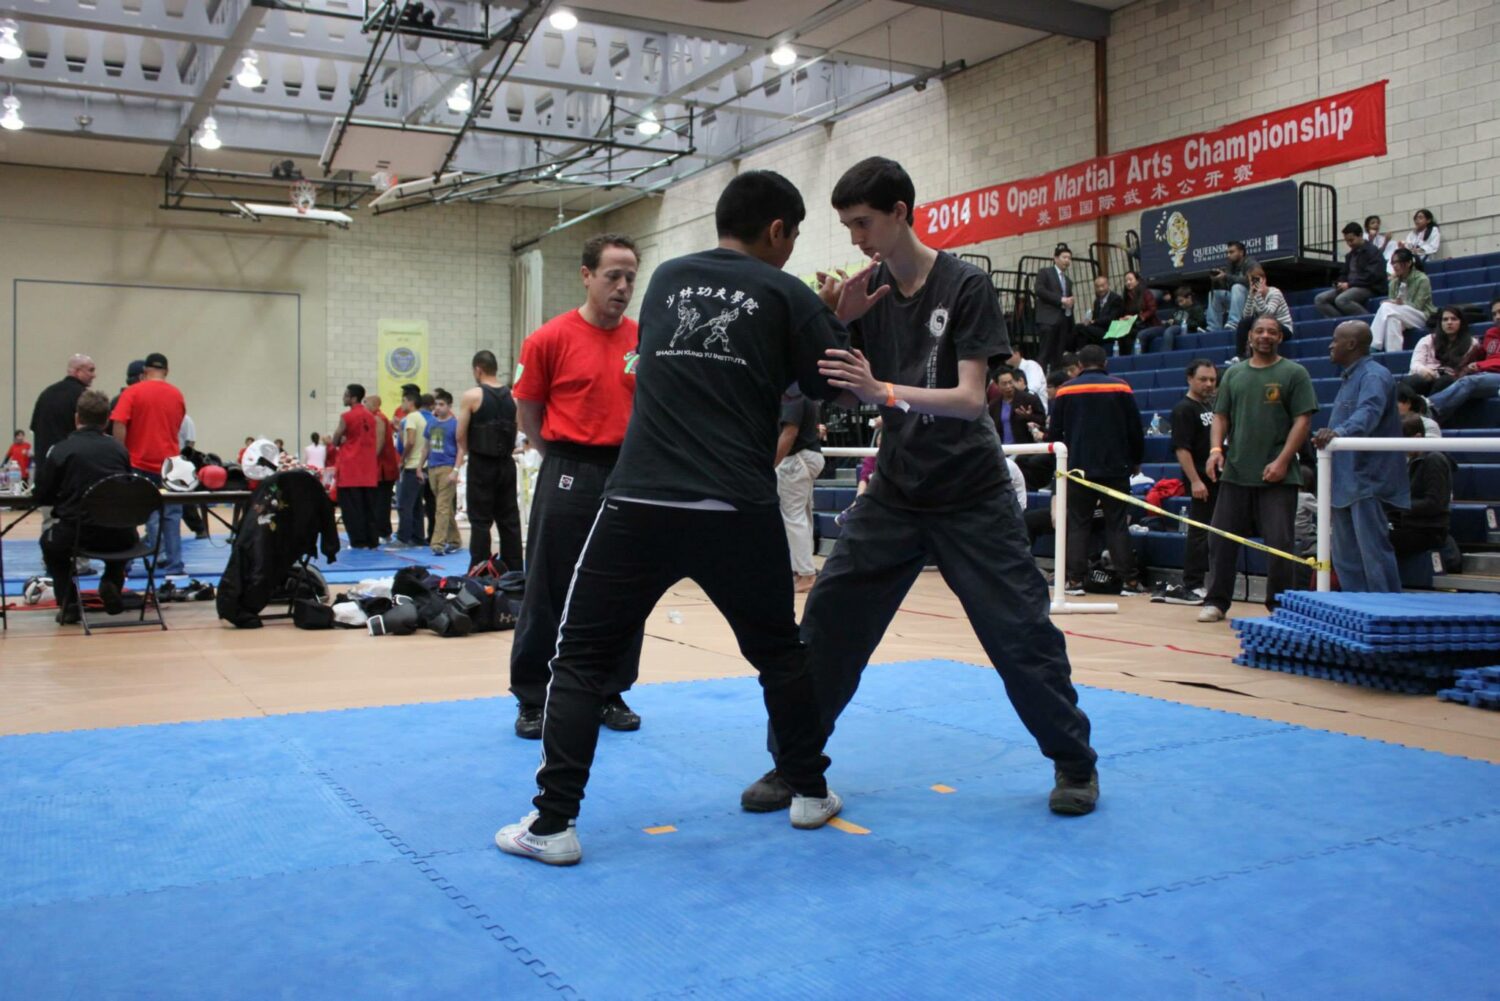 Push Hands competition at US Open Martial Arts Championship organized by the WFMAF